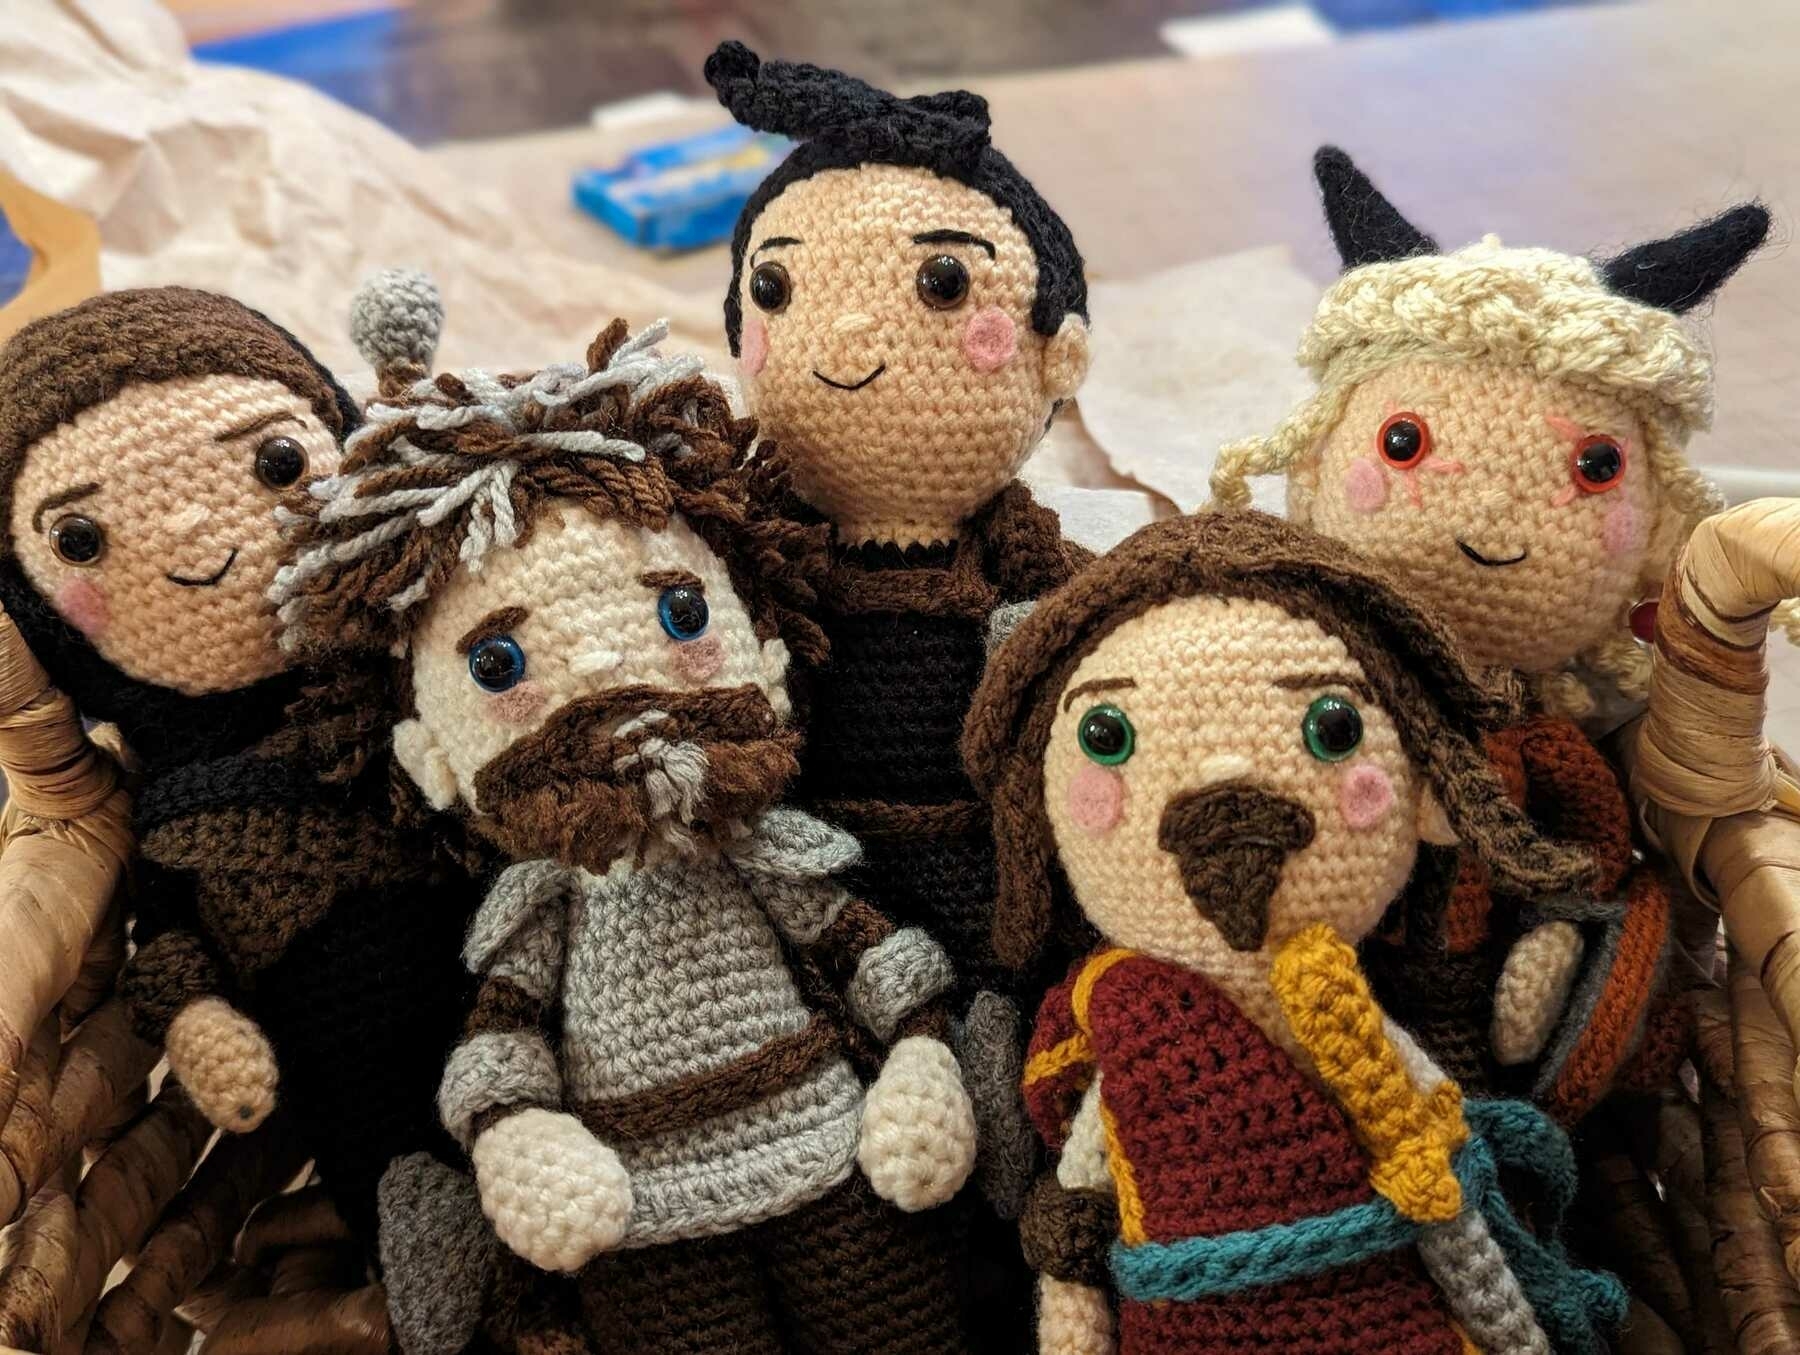 5 crocheted smiling dolls with armour and swords